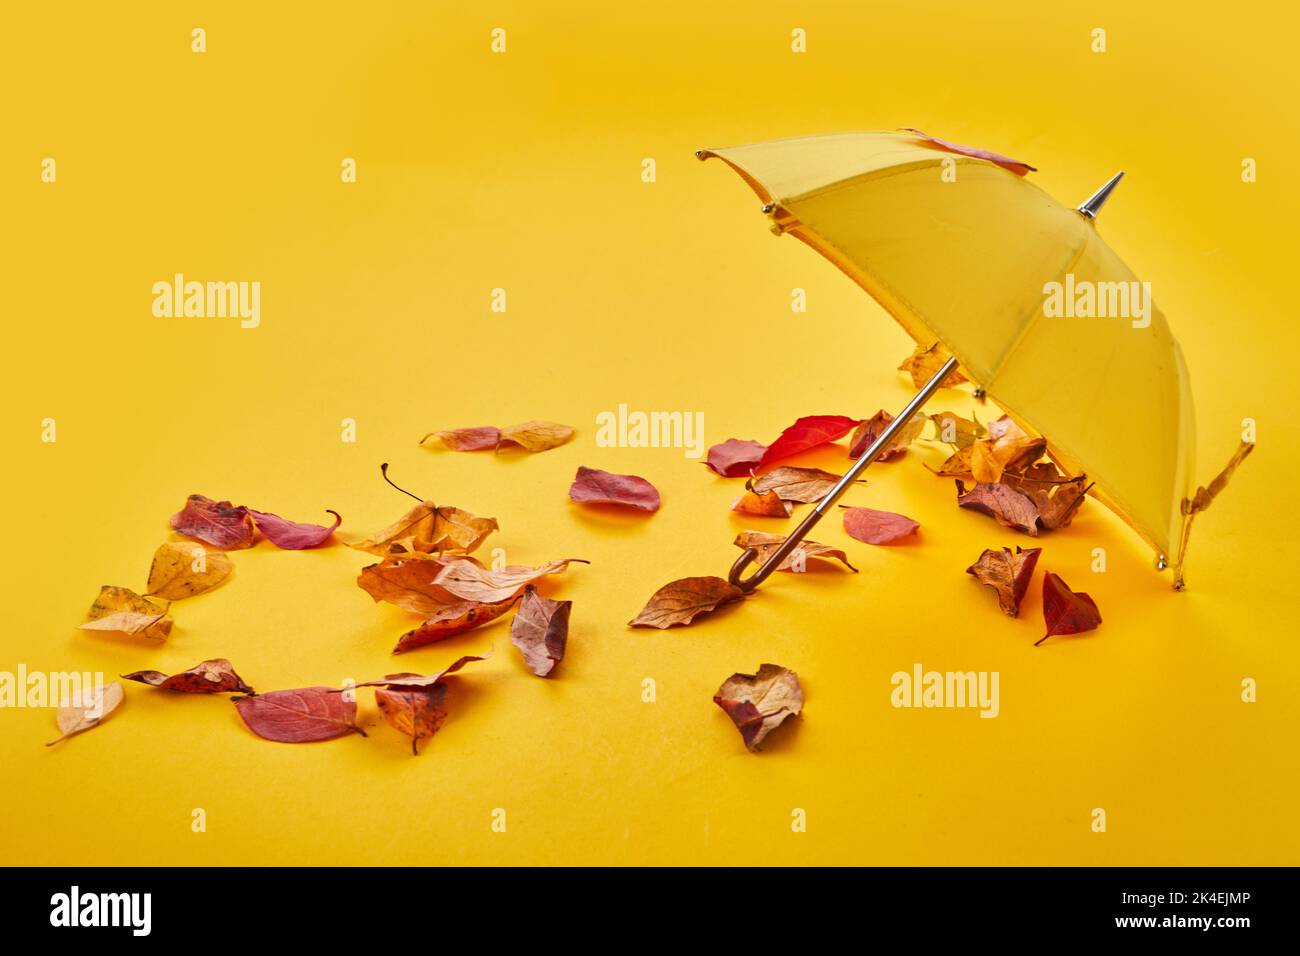 Yellow umbrella on the ground by the air and autumn leaves. Stock Photo